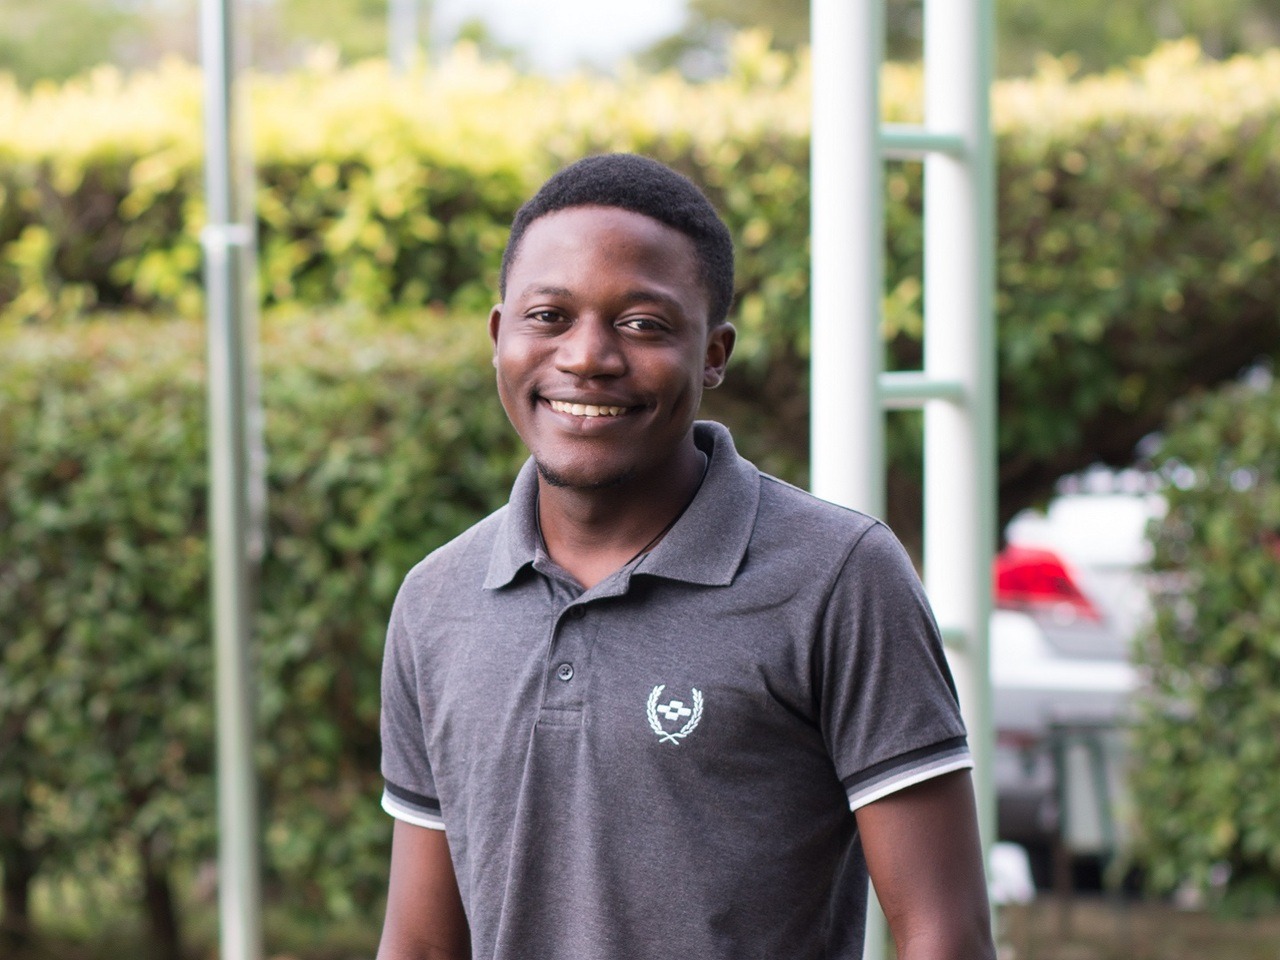 Coming from Zimbabwe, Curtin Malaysia is like my second home. Its warm, gratifying environment makes me smile as I make my way to campus each morning, excited to face the challenges of the day. As a busy mechanical engineering student, the only free...